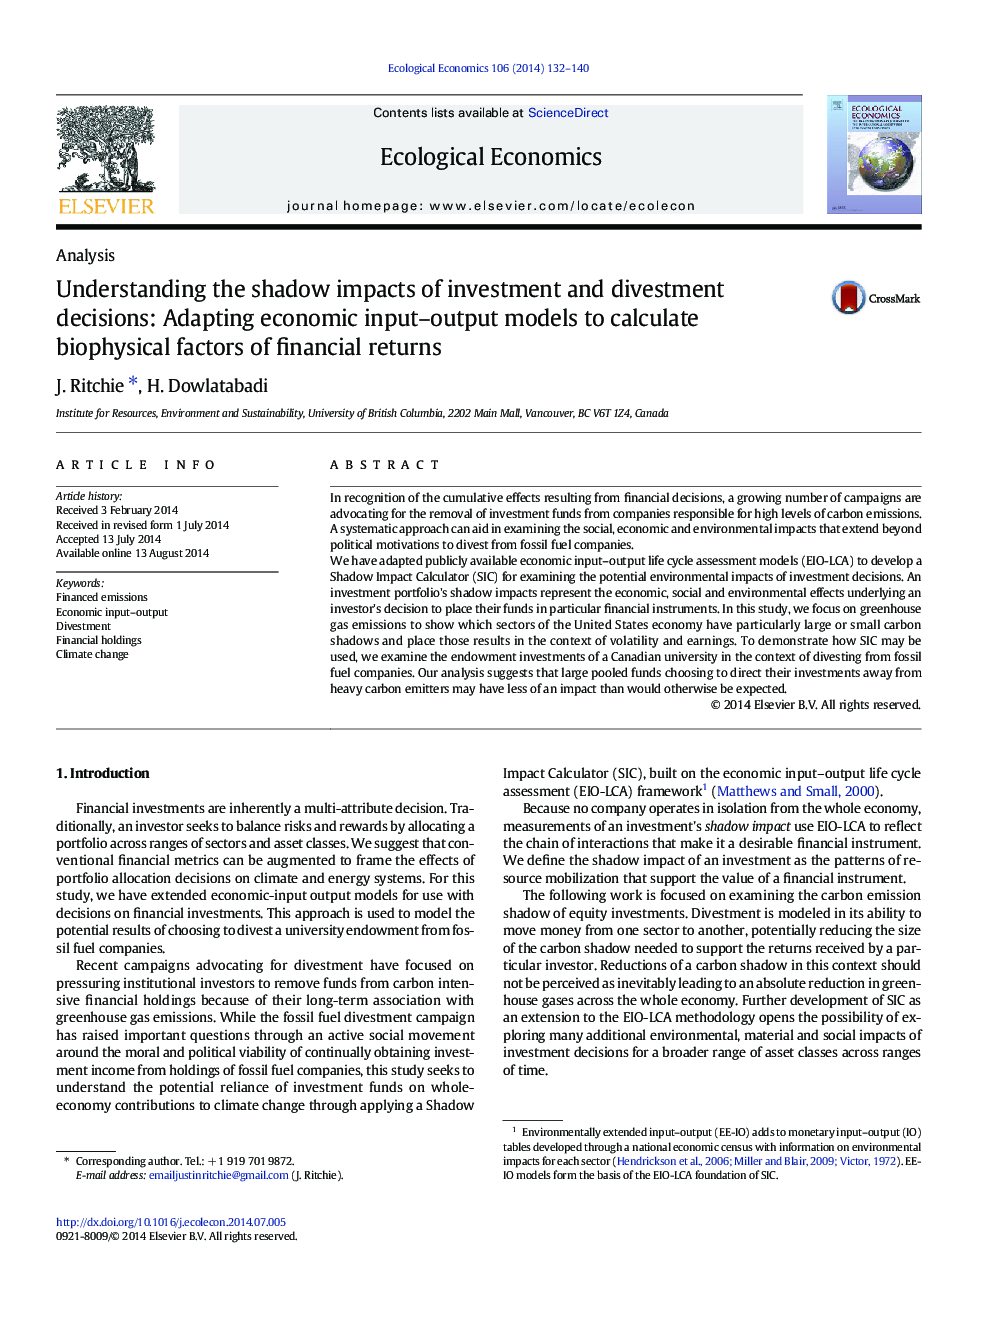 Understanding the shadow impacts of investment and divestment decisions: Adapting economic input–output models to calculate biophysical factors of financial returns